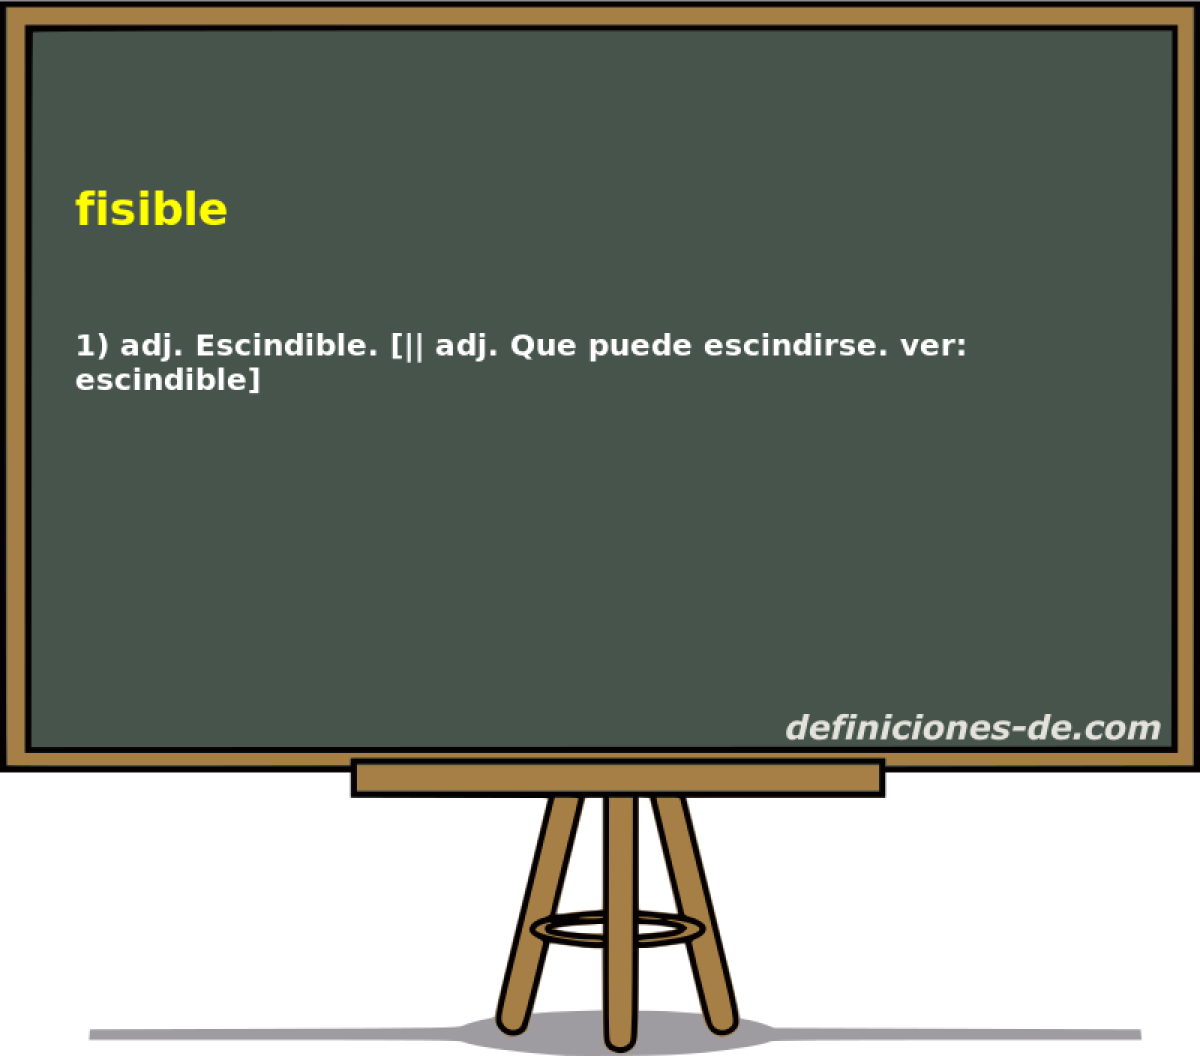 fisible 